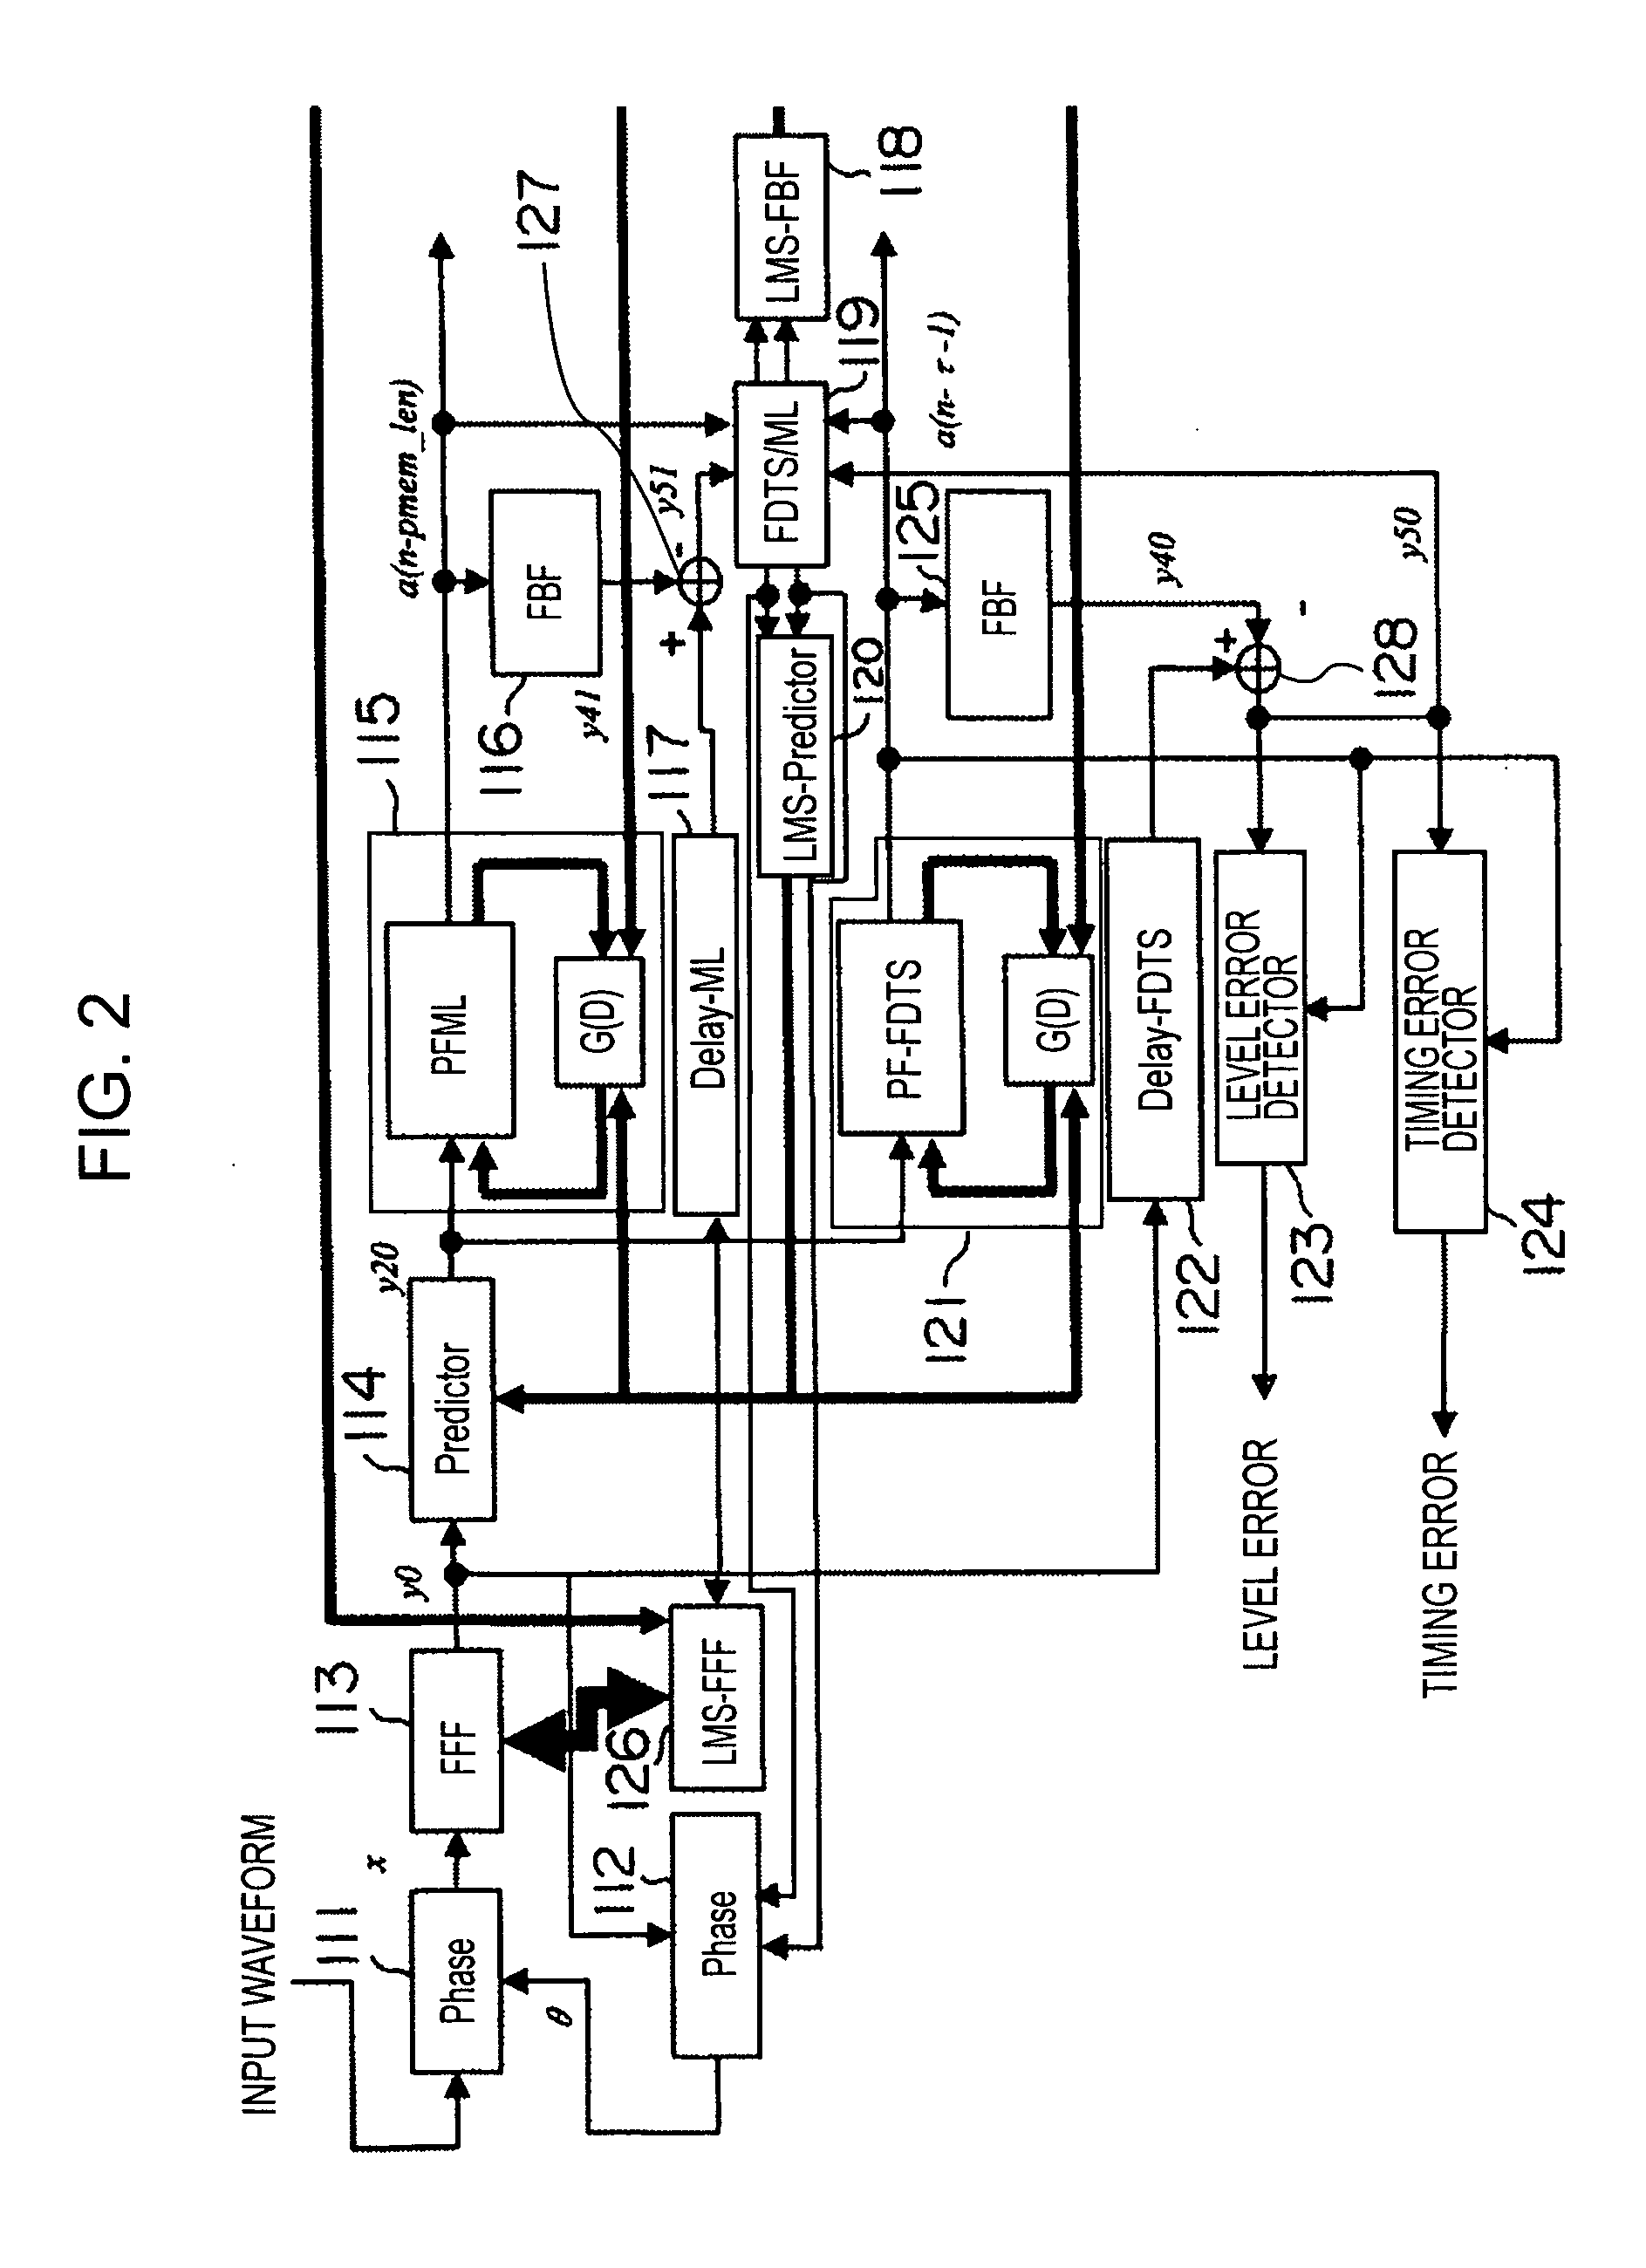 Adaptive equalizer, decoding device, and error detecting device